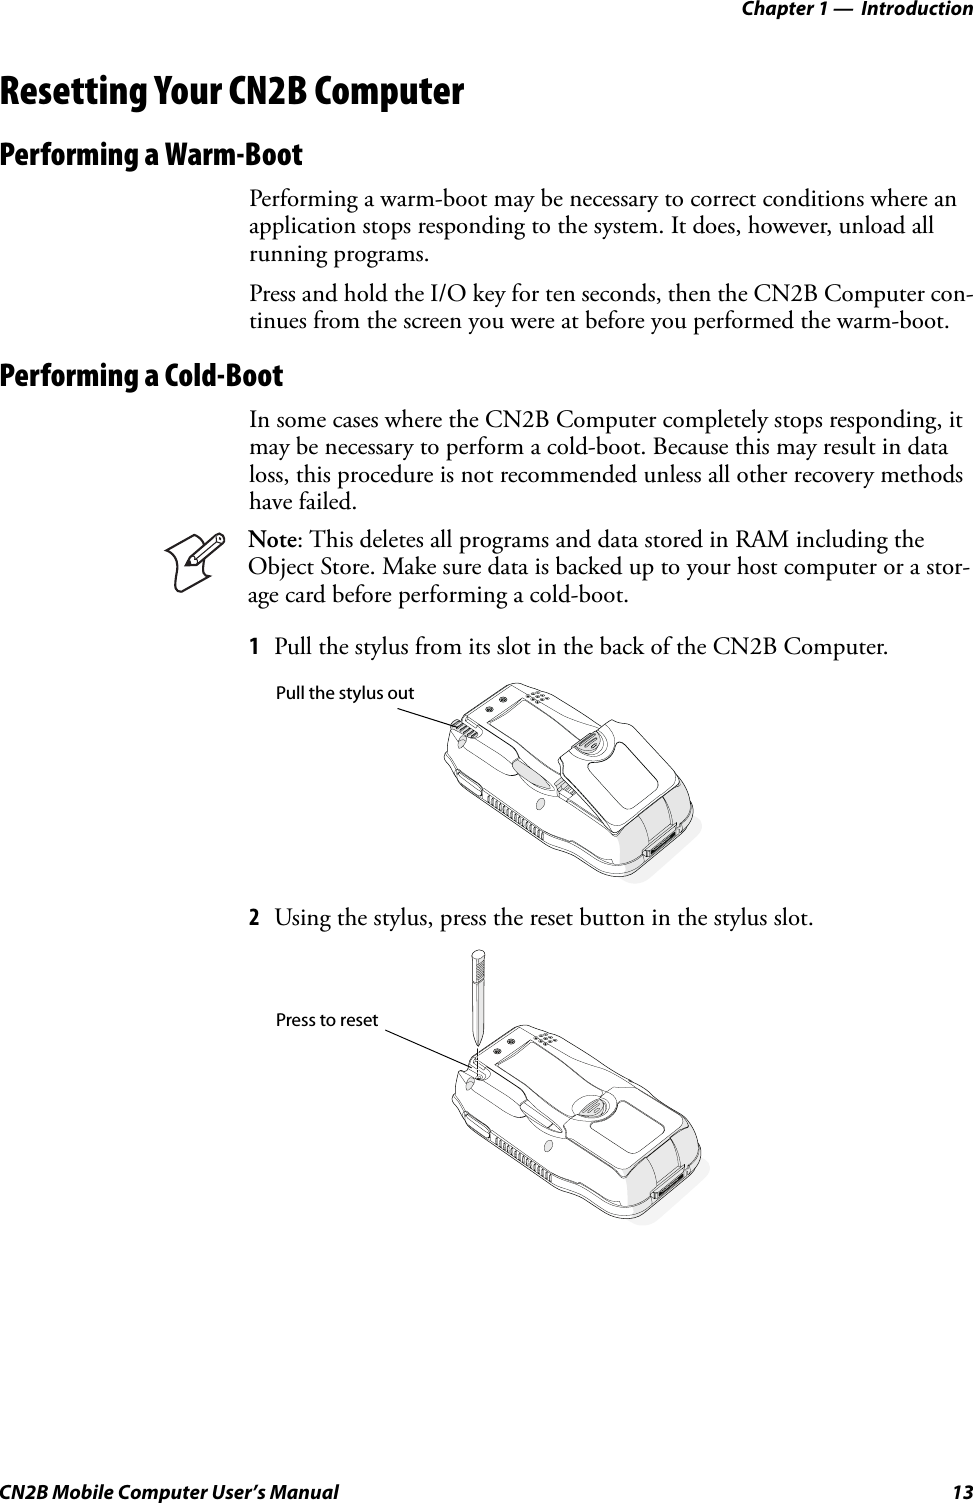 Chapter 1 —  IntroductionCN2B Mobile Computer User’s Manual 13Resetting Your CN2B ComputerPerforming a Warm-BootPerforming a warm-boot may be necessary to correct conditions where an application stops responding to the system. It does, however, unload all running programs.Press and hold the I/O key for ten seconds, then the CN2B Computer con-tinues from the screen you were at before you performed the warm-boot.Performing a Cold-BootIn some cases where the CN2B Computer completely stops responding, it may be necessary to perform a cold-boot. Because this may result in data loss, this procedure is not recommended unless all other recovery methods have failed.1Pull the stylus from its slot in the back of the CN2B Computer.2Using the stylus, press the reset button in the stylus slot.Note: This deletes all programs and data stored in RAM including the Object Store. Make sure data is backed up to your host computer or a stor-age card before performing a cold-boot.Pull the stylus outPress to reset